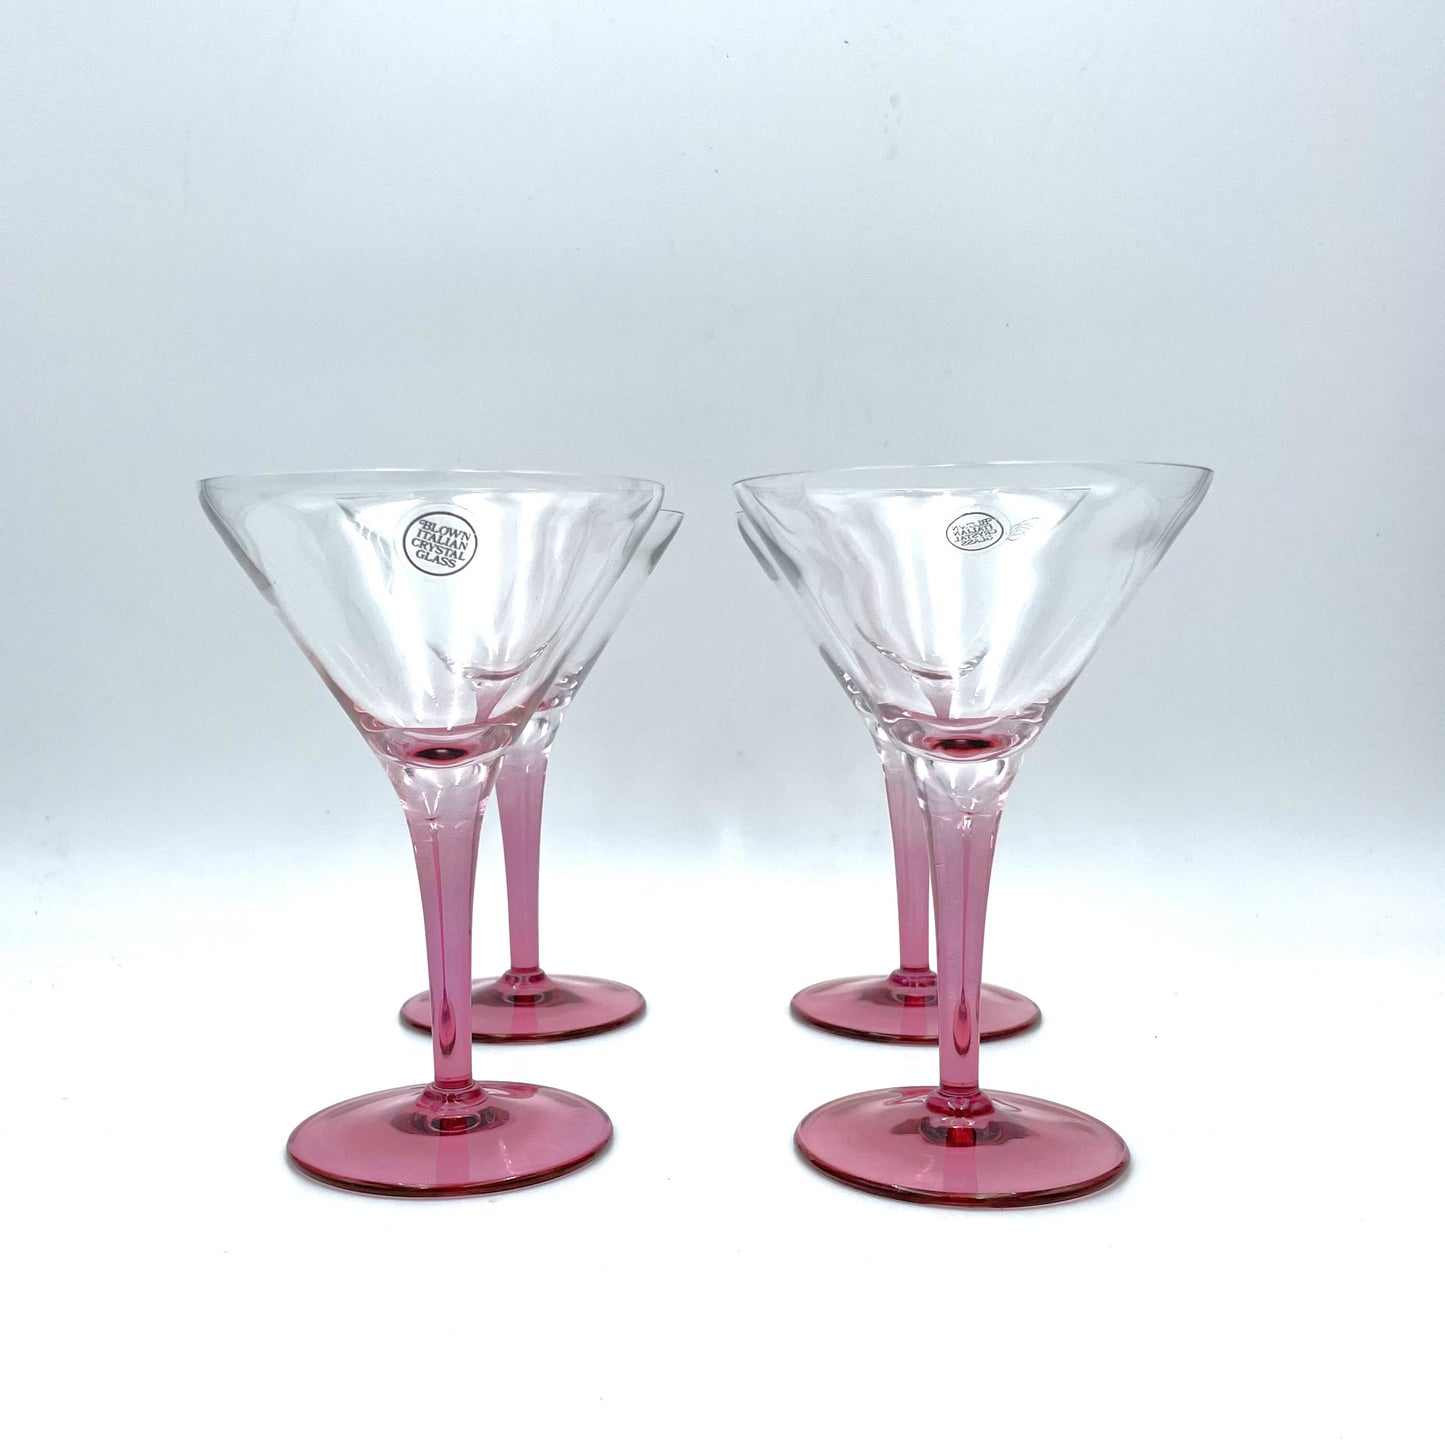 Four Handblown Pink Stem Martini Glasses made in Italy